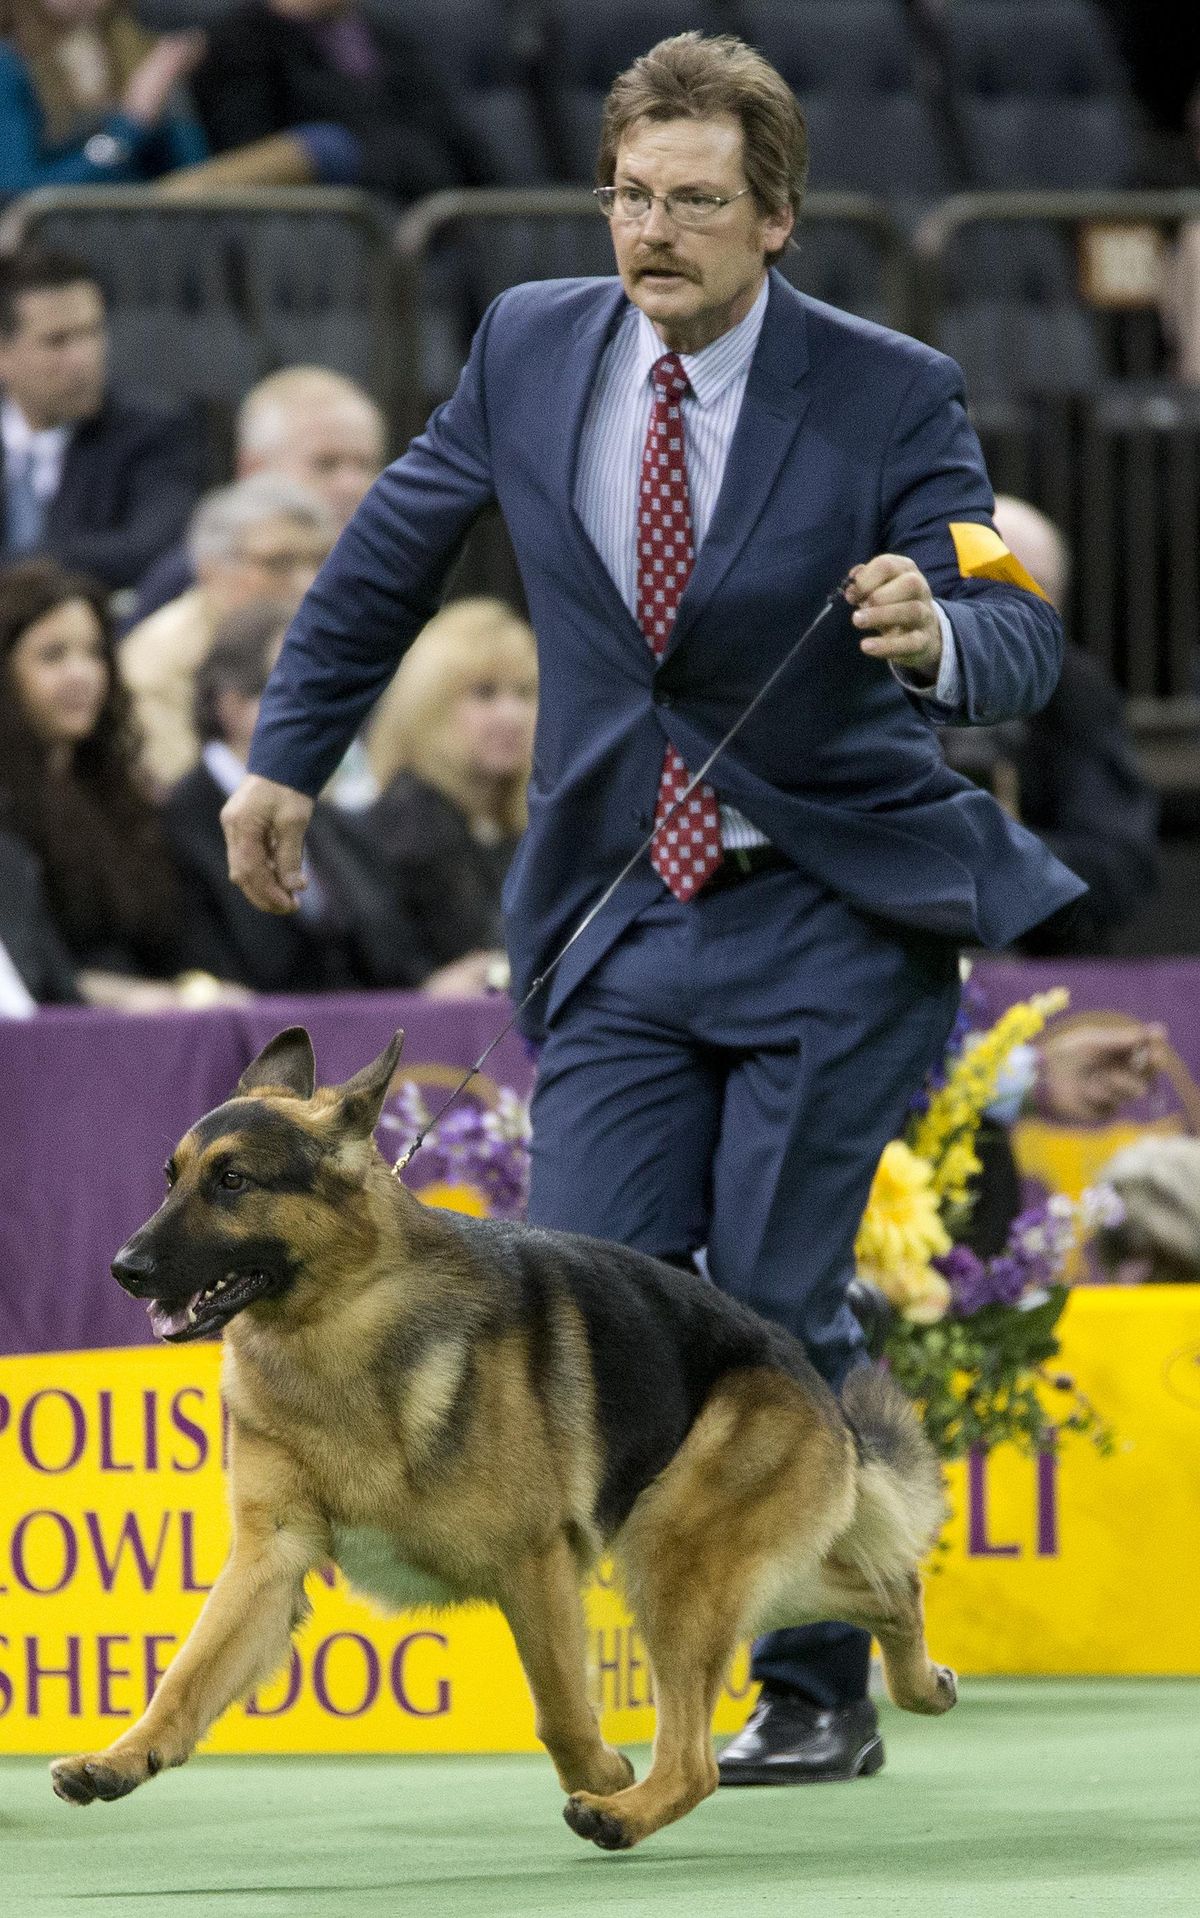 Rumor, a German shepherd, is shown in the ring during the Herding group competition during the 140th Westminster Kennel Club dog show Monday at Madison Square Garden in New York. Rumor won the best in Herding group. (Mary Altaffer / Associated Press)